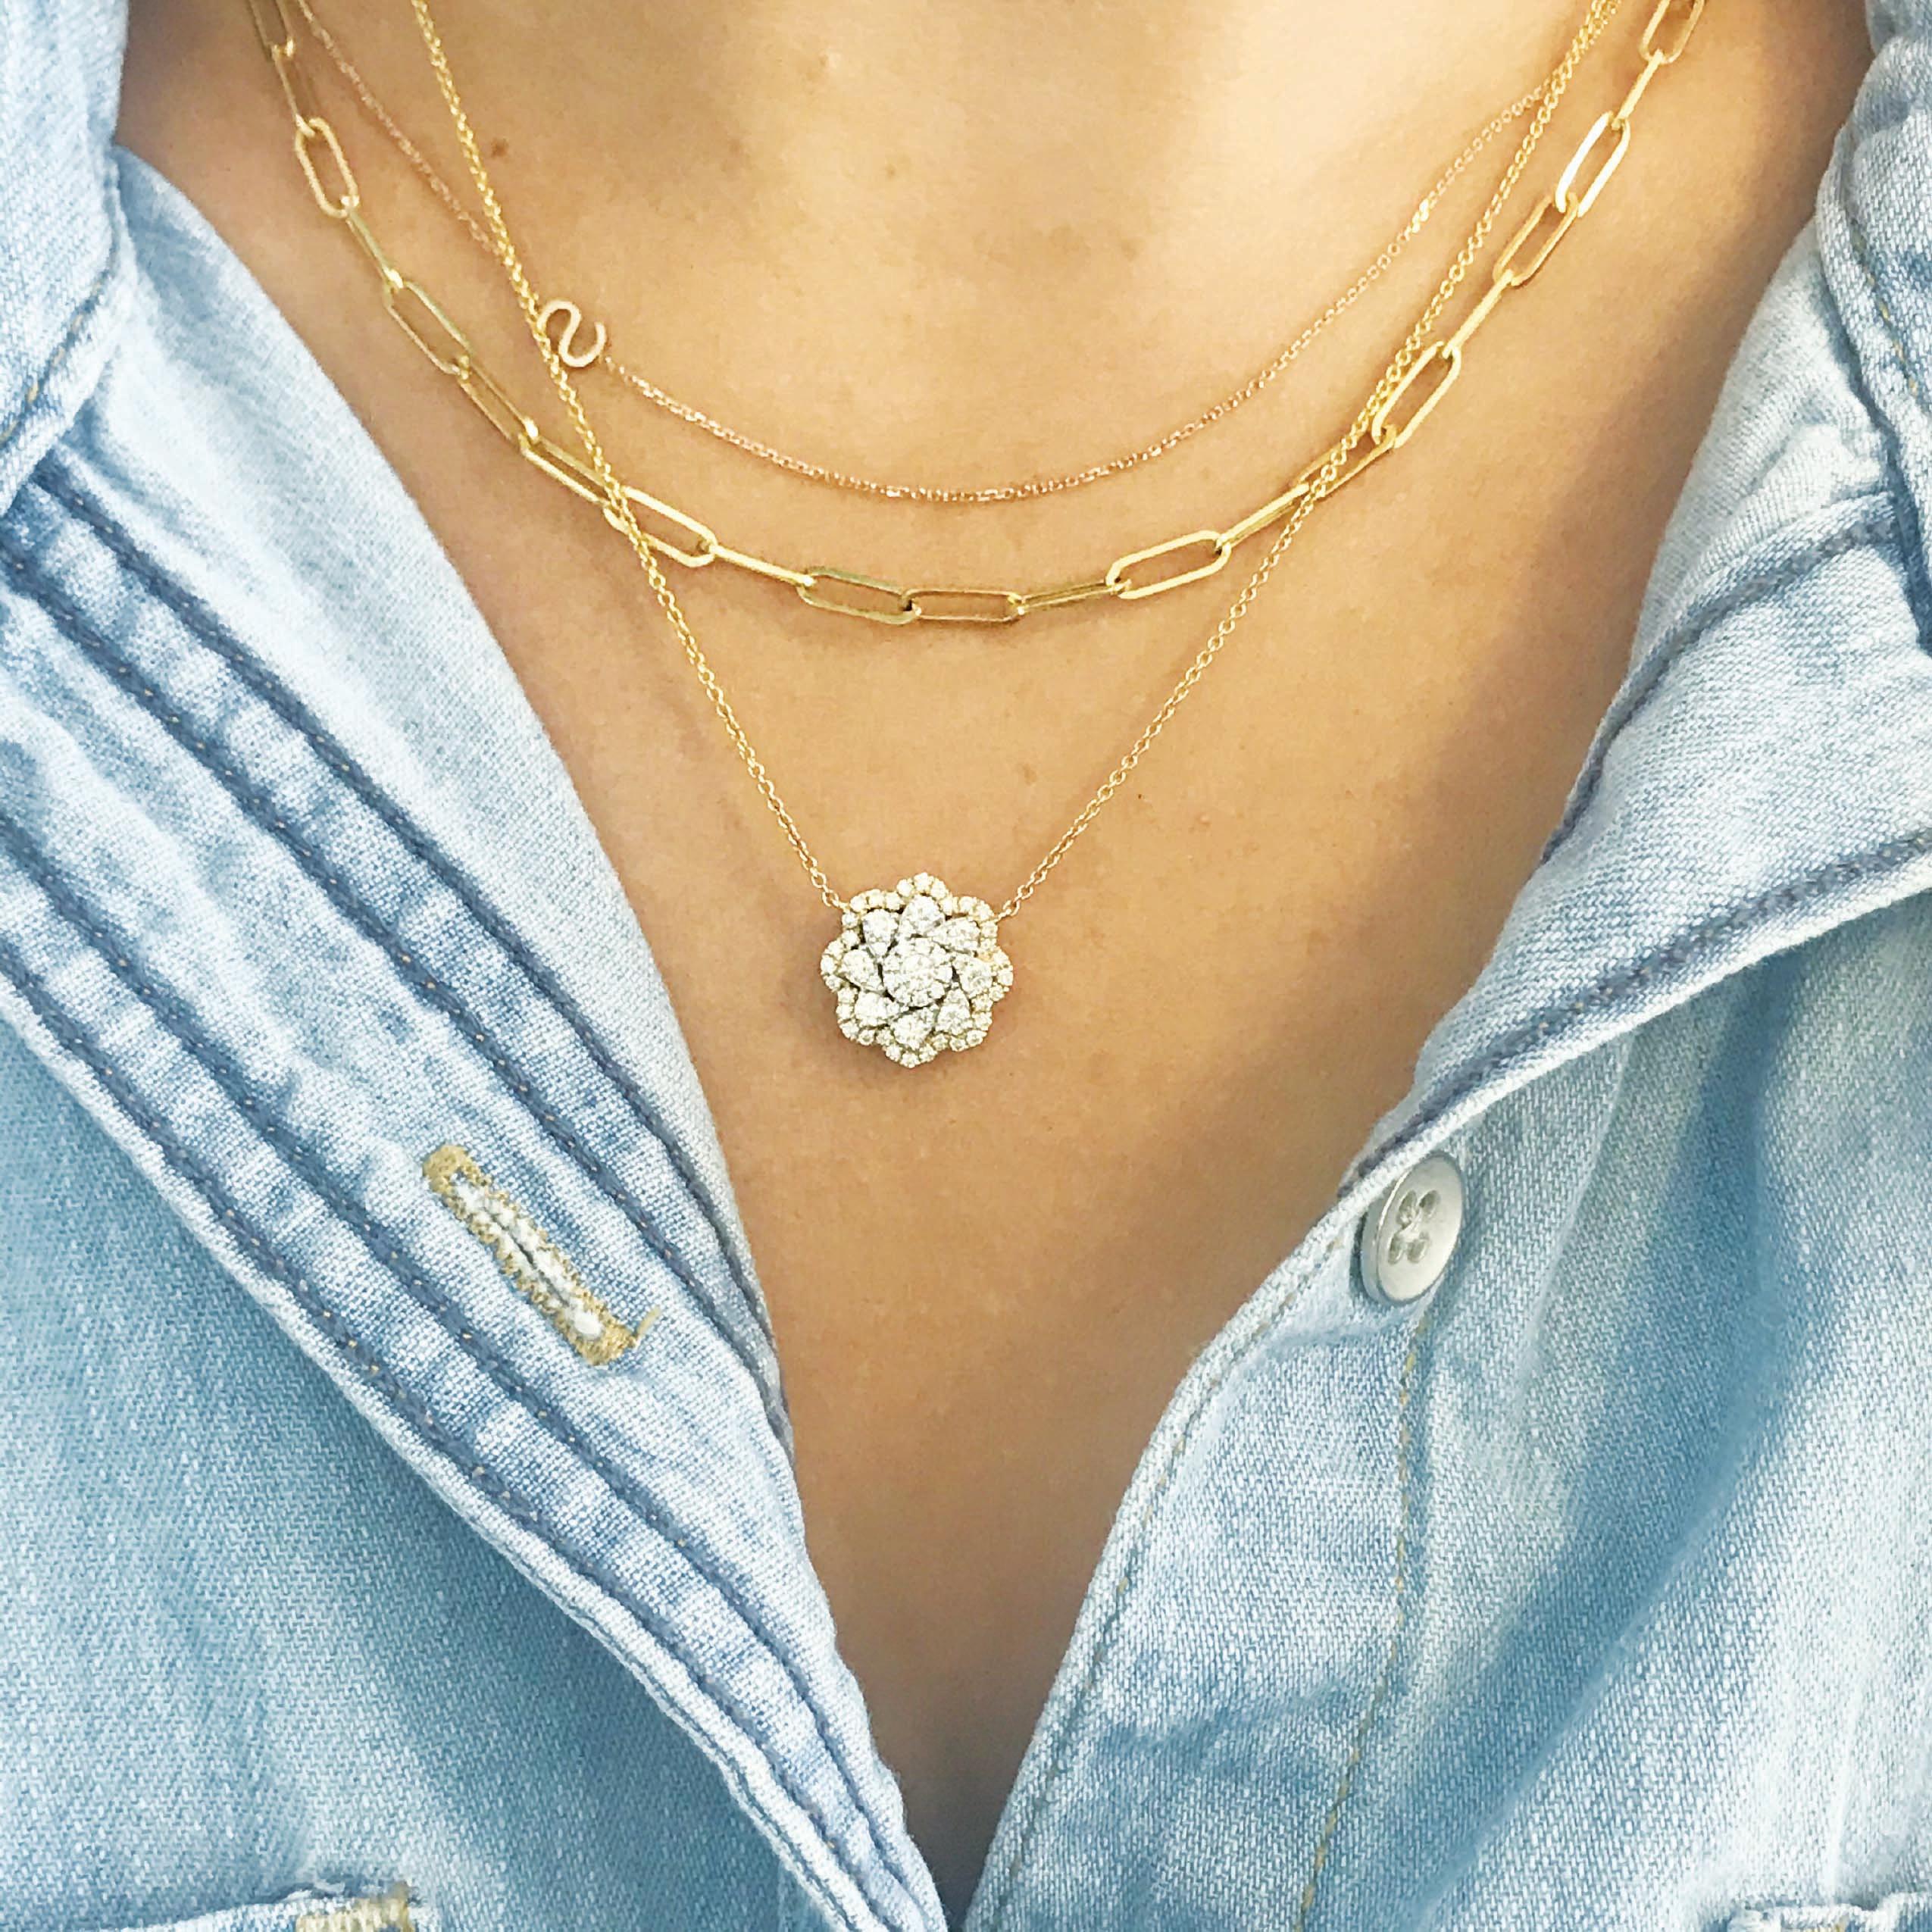 Gorgeous diamond flower pendant and chain! The necklace has 58 round brilliant diamonds, micro-pave set in a gorgeous floral arrangement! The 2 tone design is dynamic and classy! The necklace goes with everything! Wear it on its own as a statement,